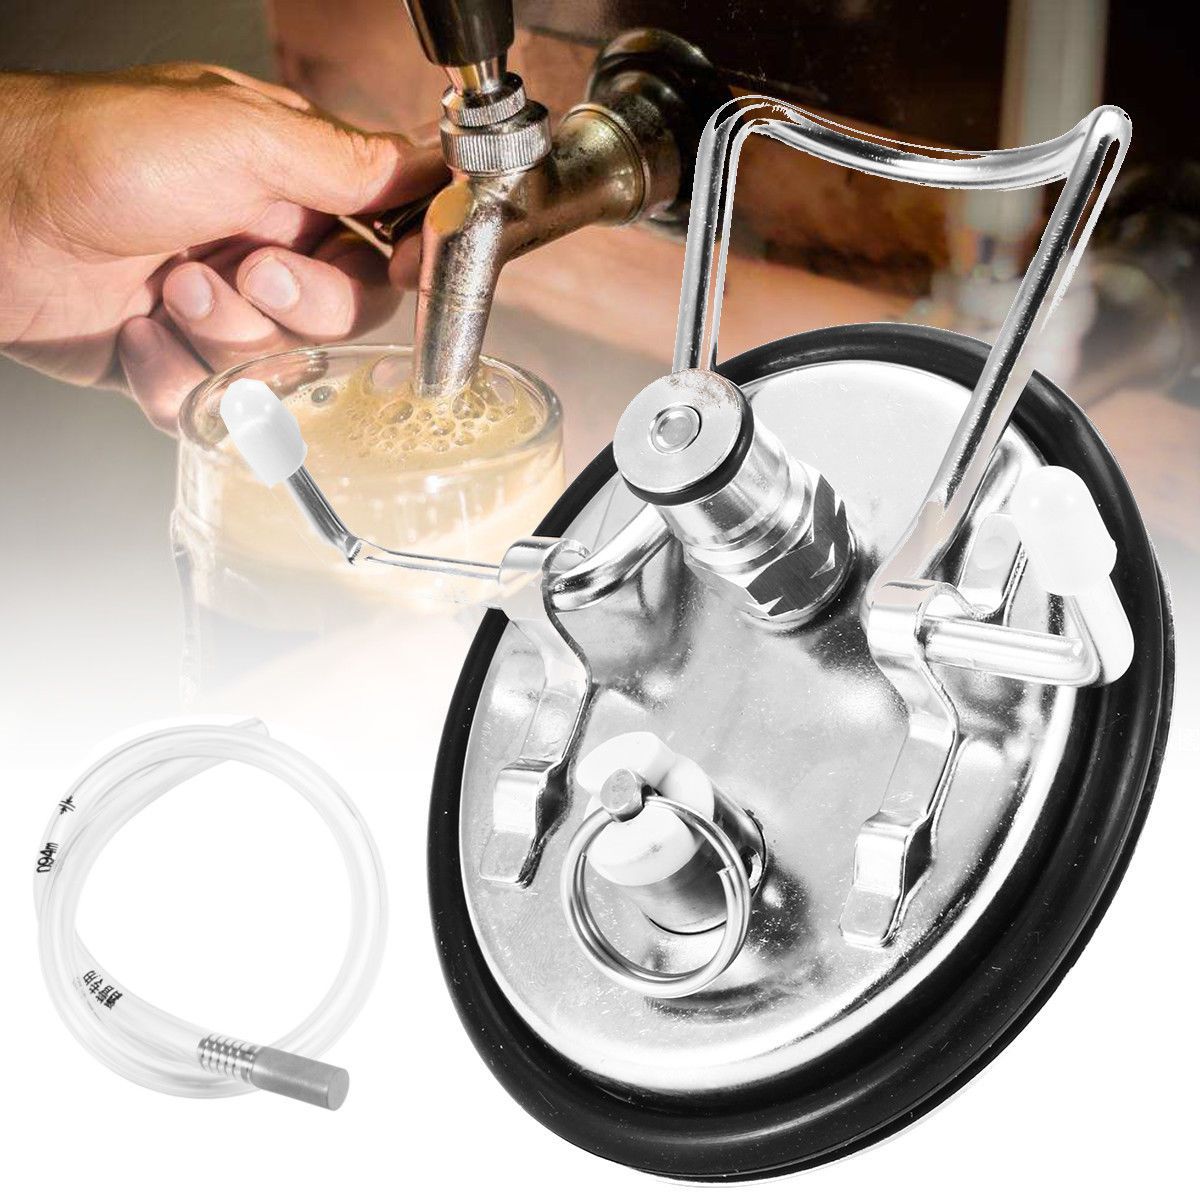 Stainless-Steel-Keg-Lid-Replacement-Kit-Beer-Keg-Home-Brew-Tools-Kit-Bar-Accessory-With-Hose-1385788